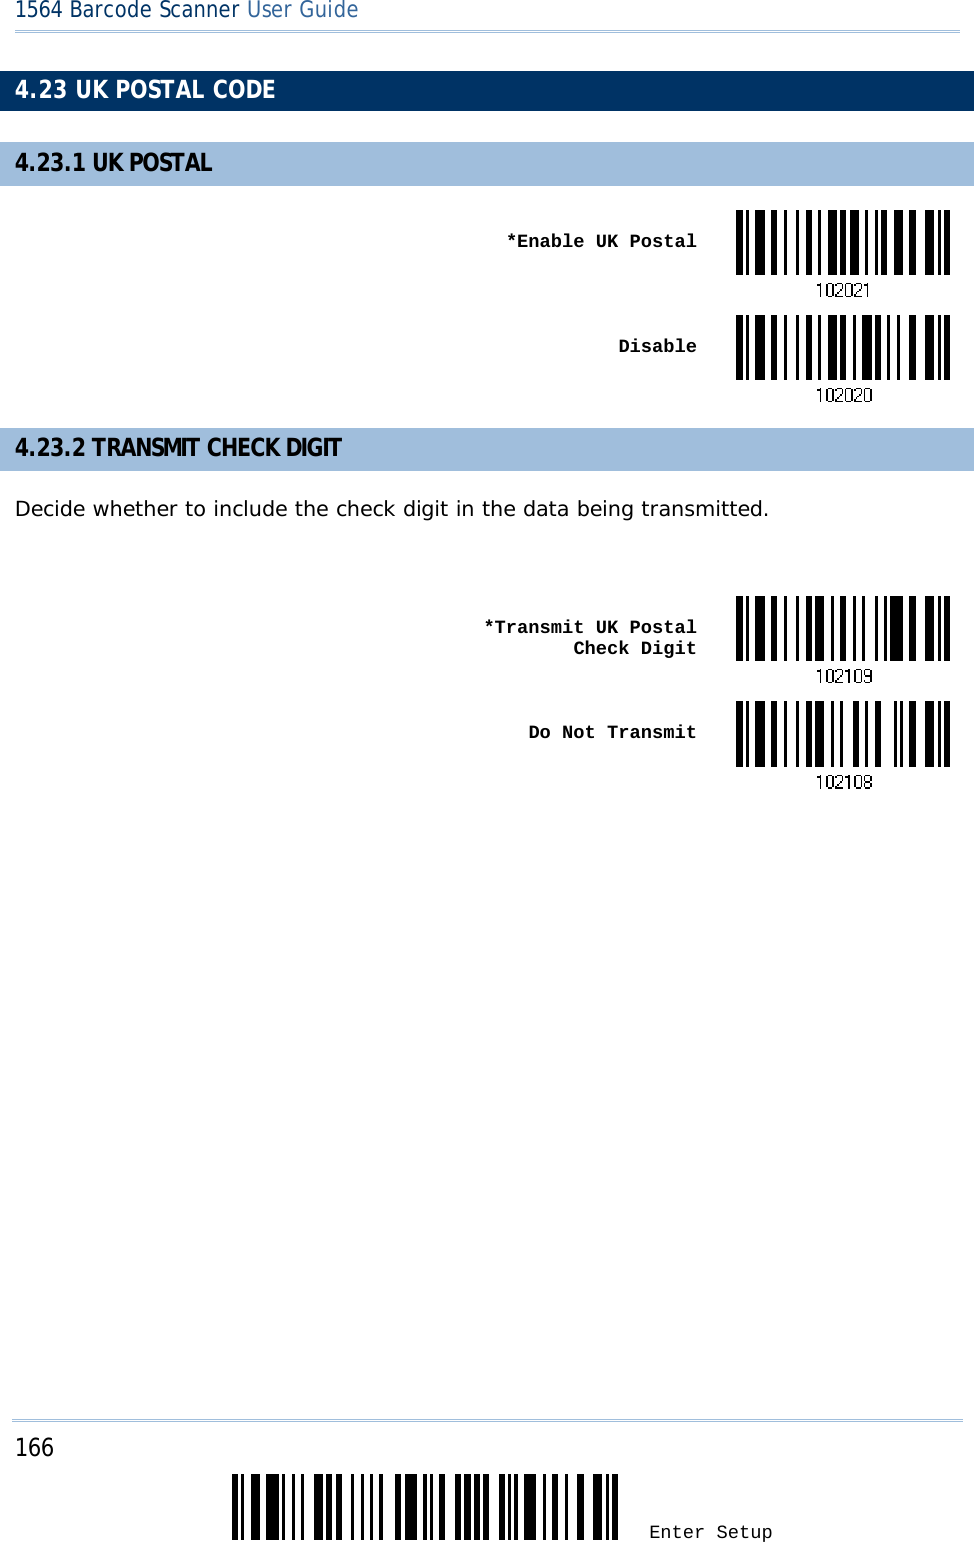 166 Enter Setup 1564 Barcode Scanner User Guide  4.23 UK POSTAL CODE 4.23.1 UK POSTAL  *Enable UK Postal Disable4.23.2 TRANSMIT CHECK DIGIT Decide whether to include the check digit in the data being transmitted.   *Transmit UK Postal Check Digit Do Not Transmit             